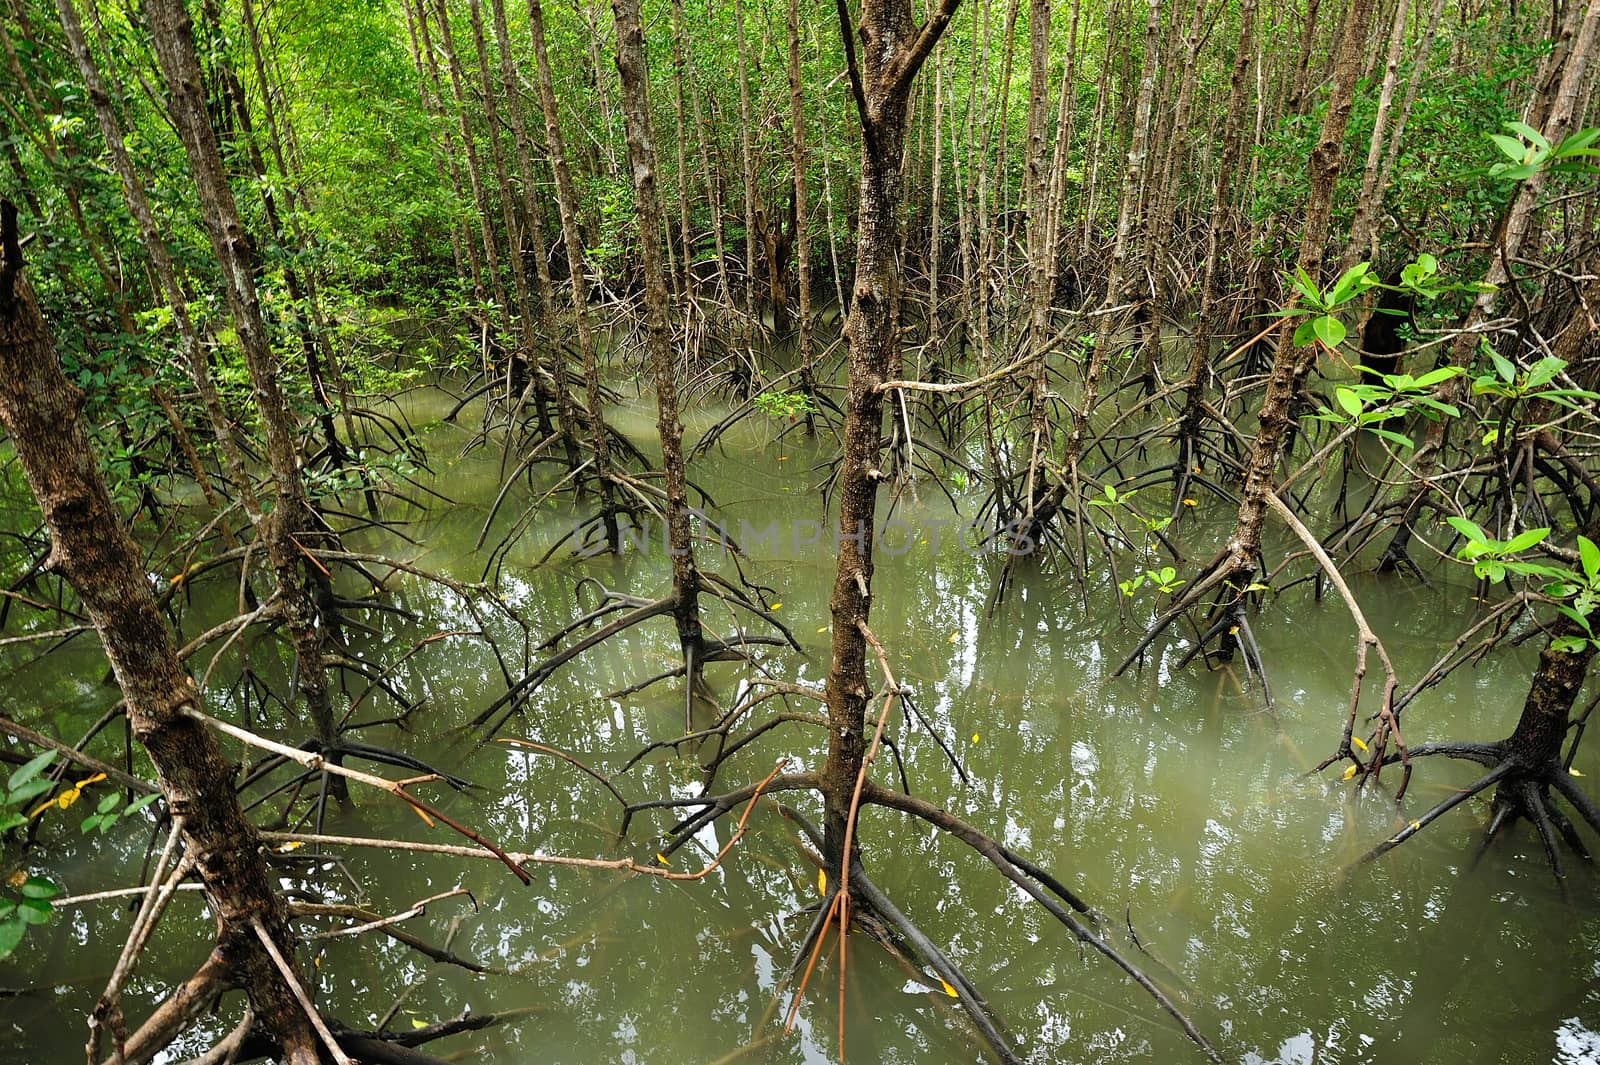 The forest mangrove at Songkra, Thailand. by think4photop